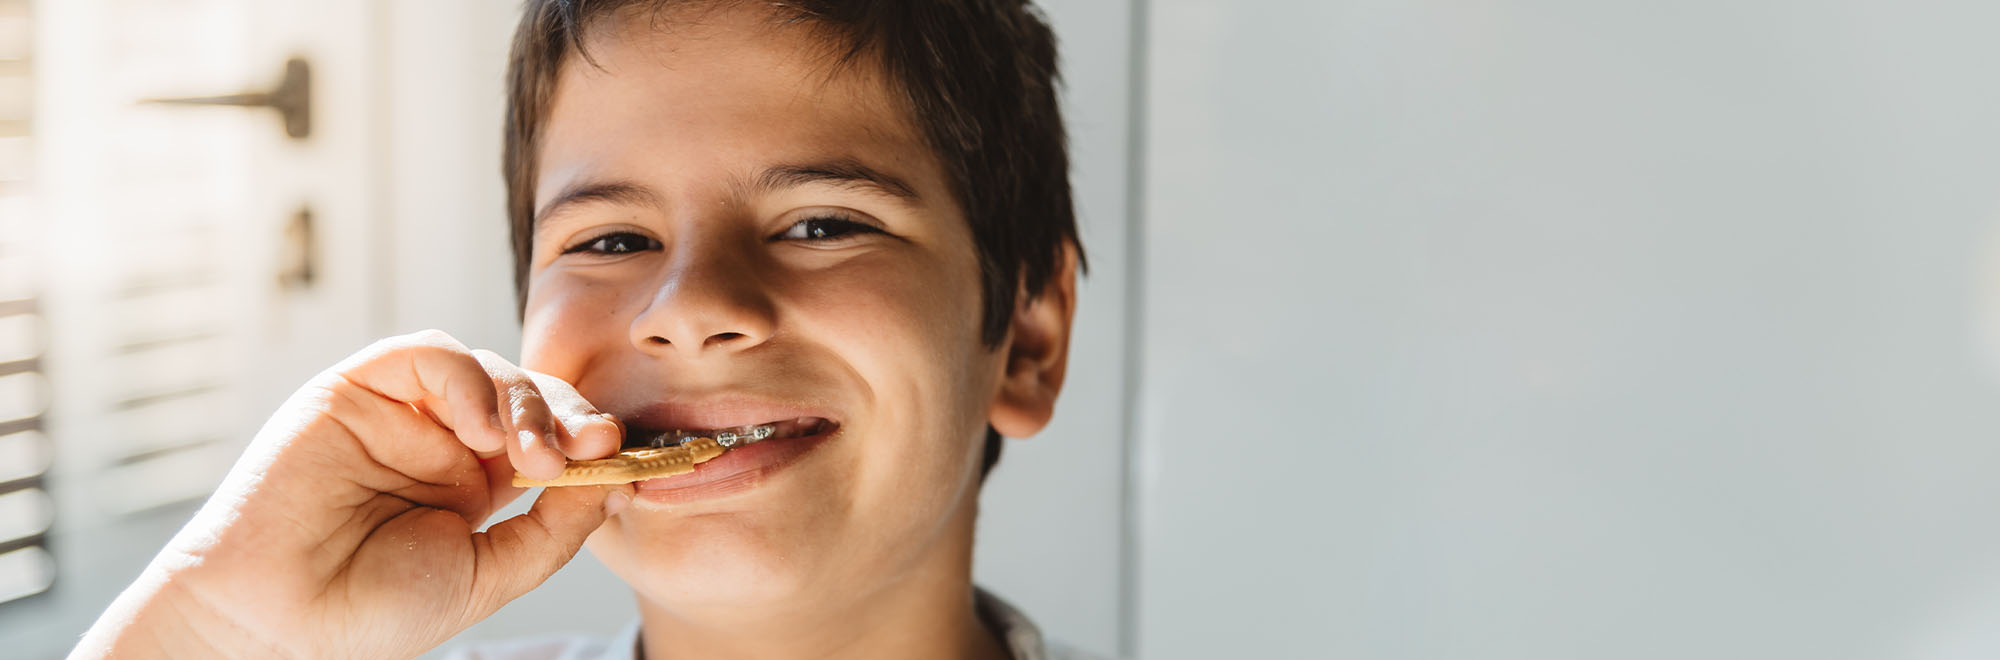 How will braces impact your life and the way you eat during treatment?